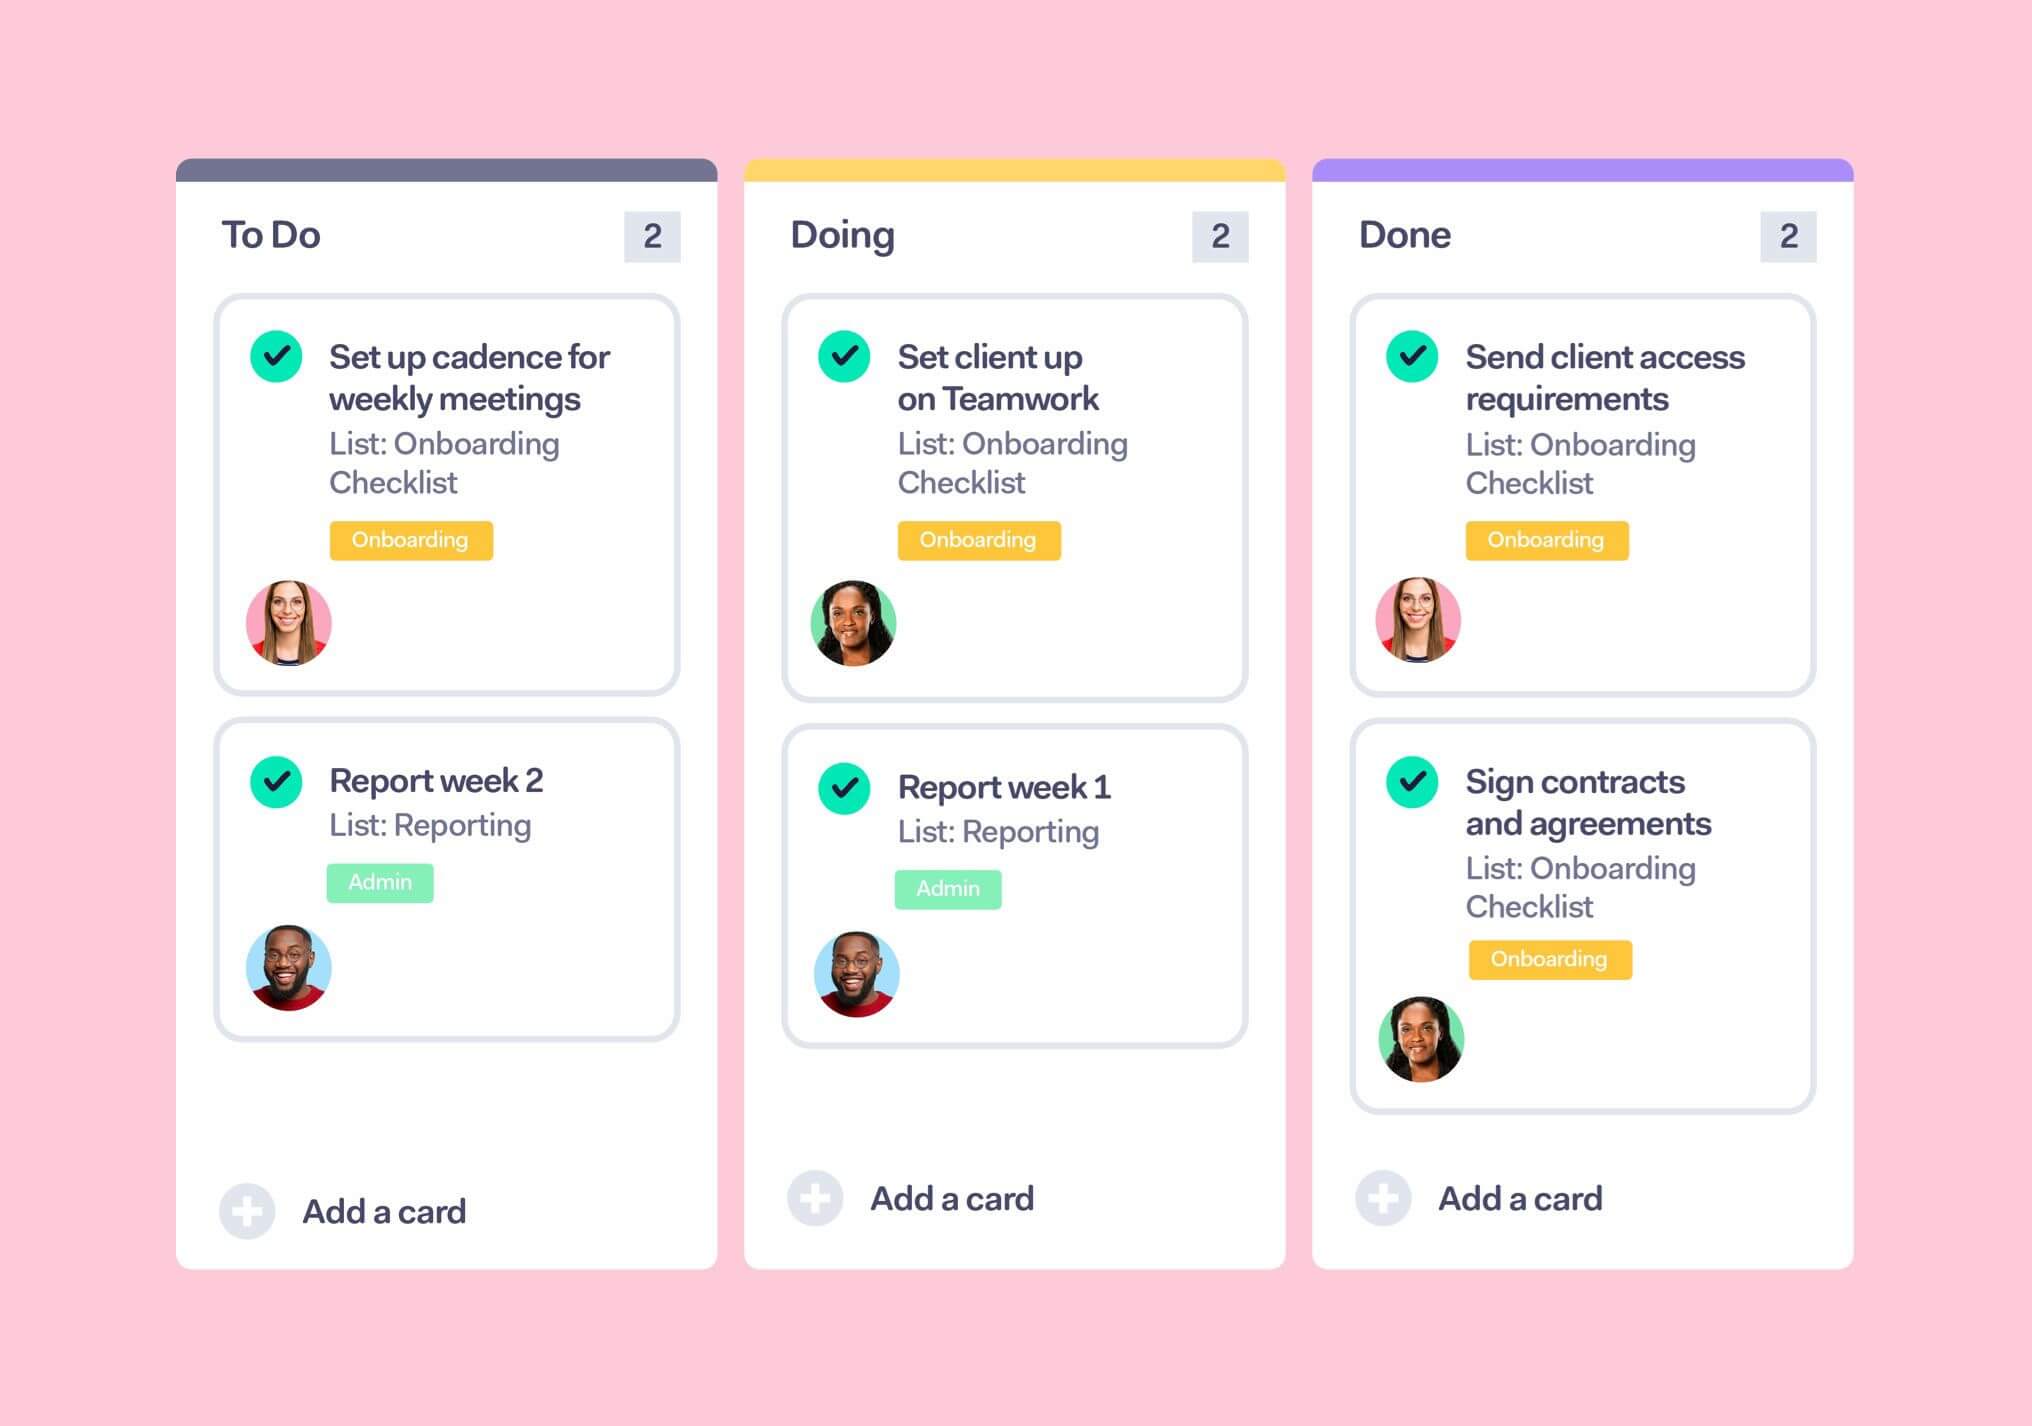 How to use our new client onboarding checklist template